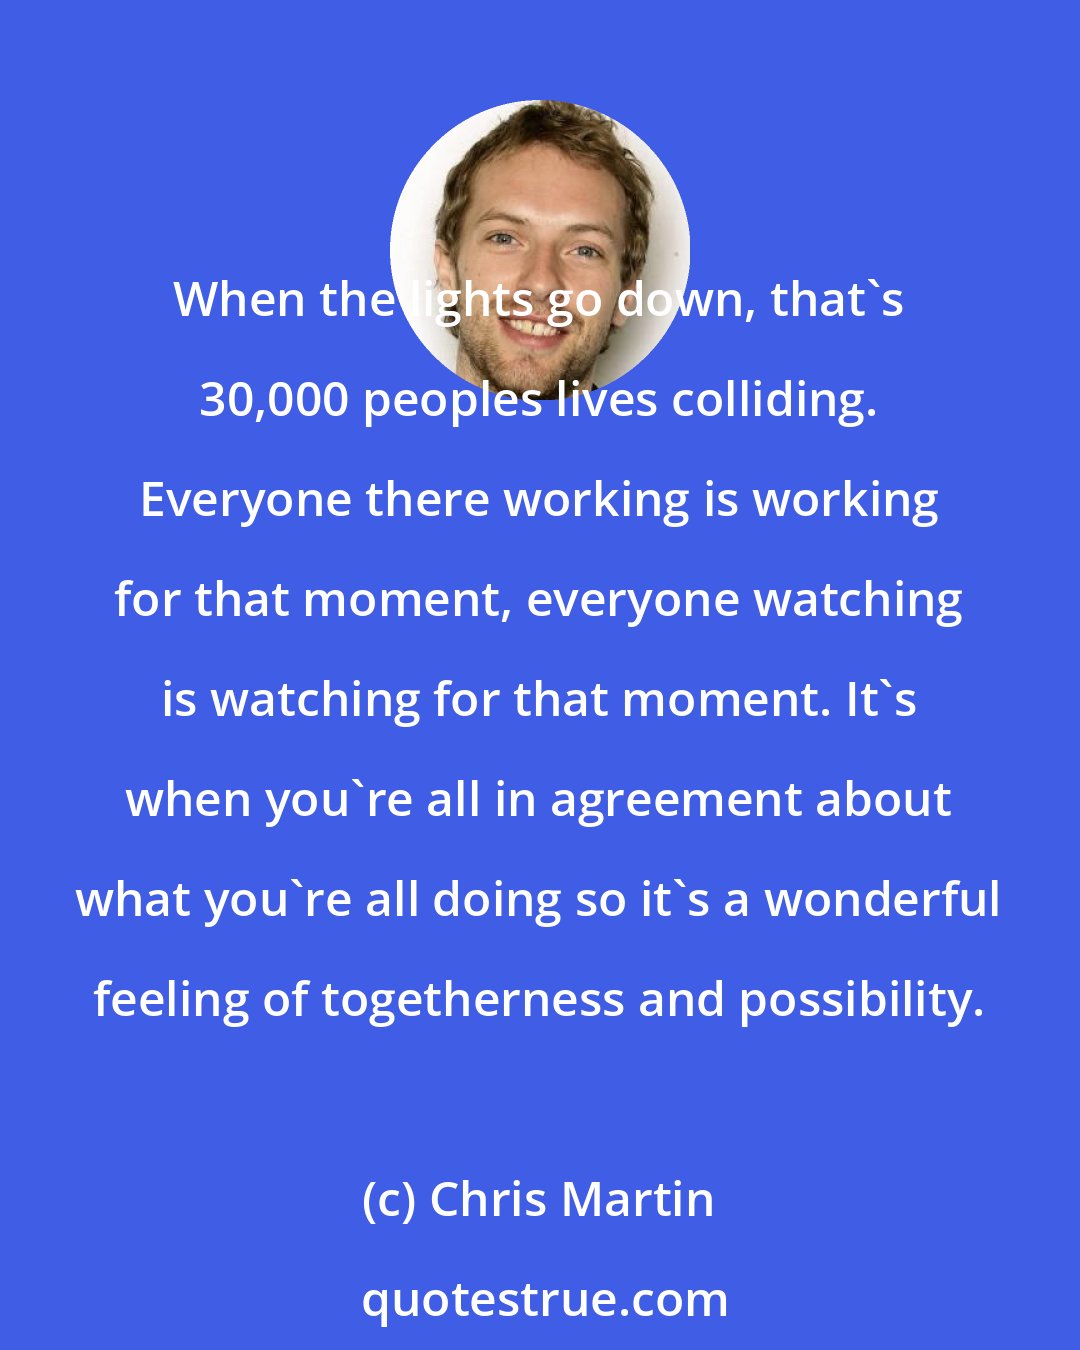 Chris Martin: When the lights go down, that's 30,000 peoples lives colliding. Everyone there working is working for that moment, everyone watching is watching for that moment. It's when you're all in agreement about what you're all doing so it's a wonderful feeling of togetherness and possibility.